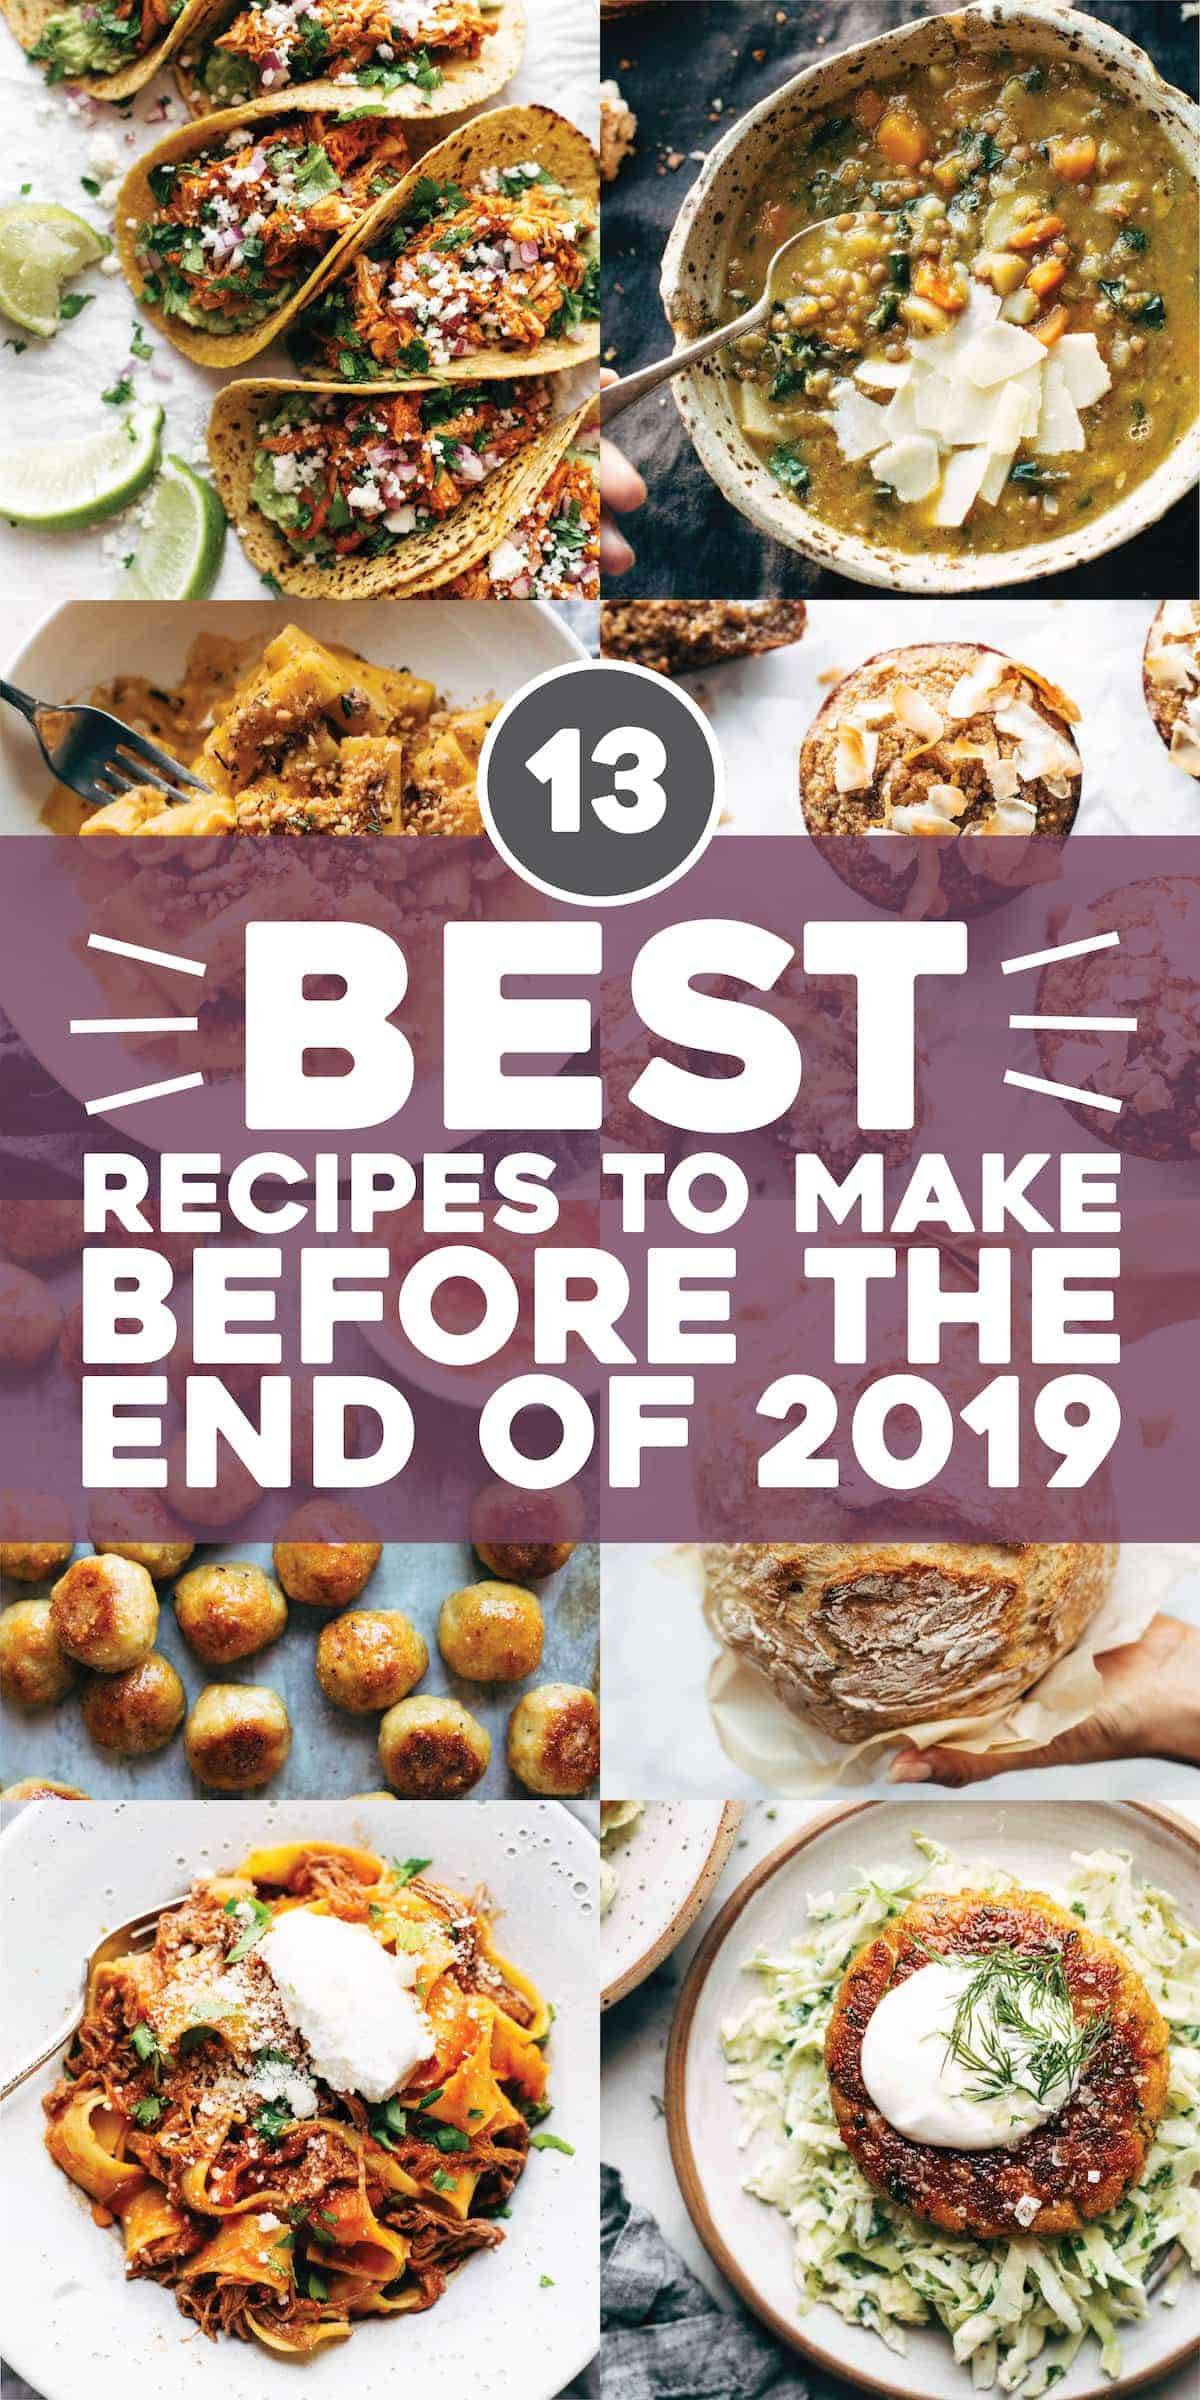 A page filled with pics of various dishes and titled as "Best Recipes to Make Before the End of 2019".